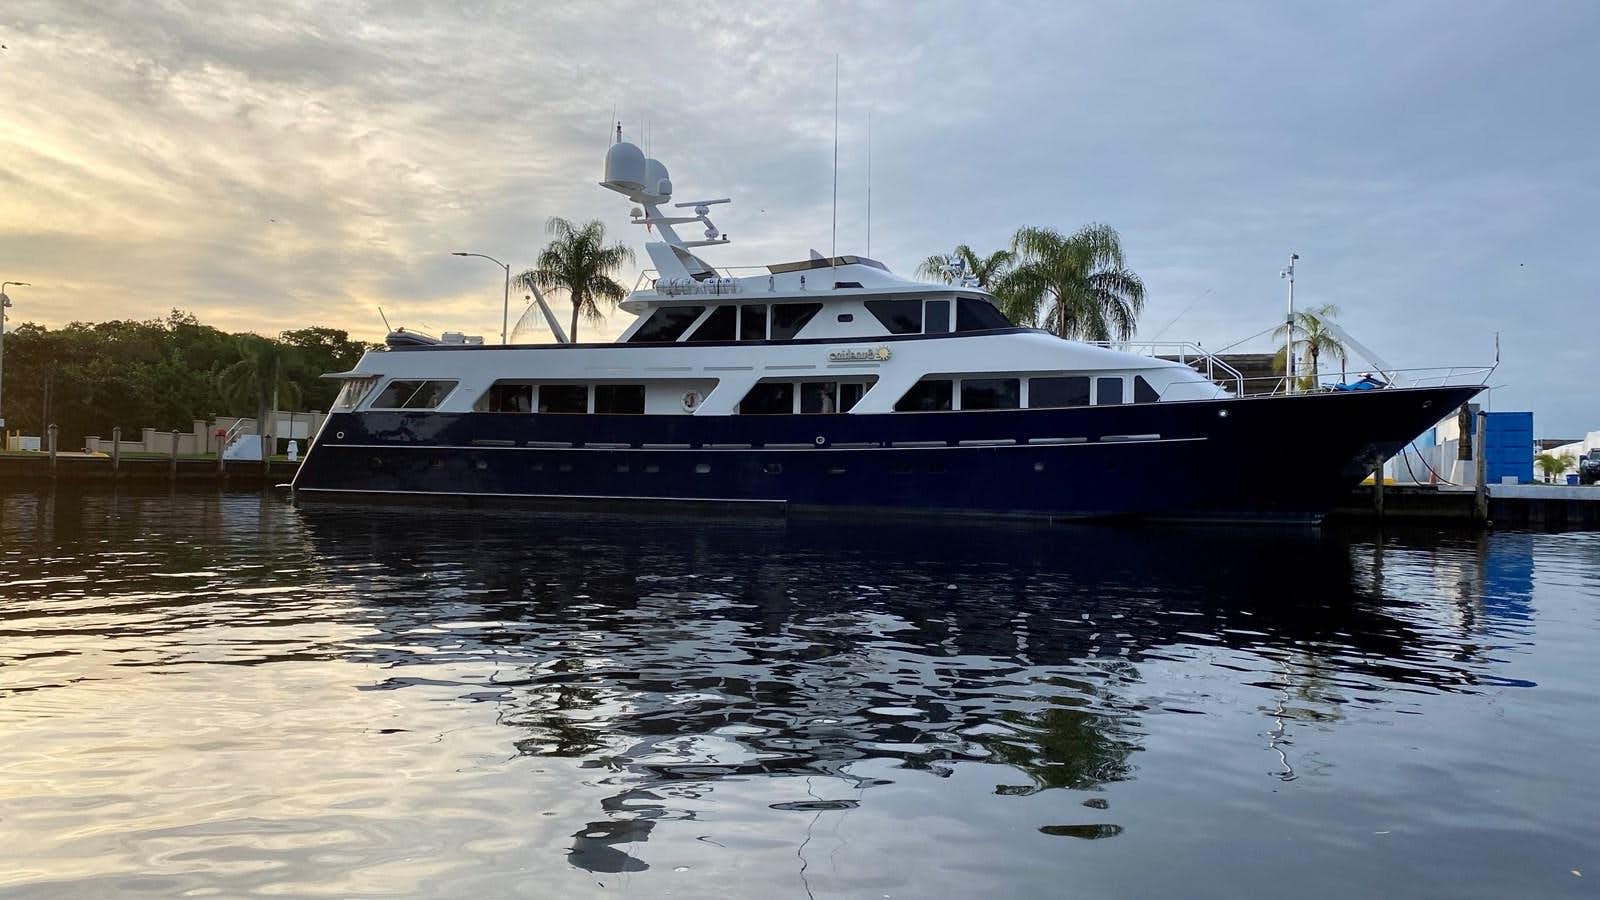 Watch Video for SUNSHINE Yacht for Sale